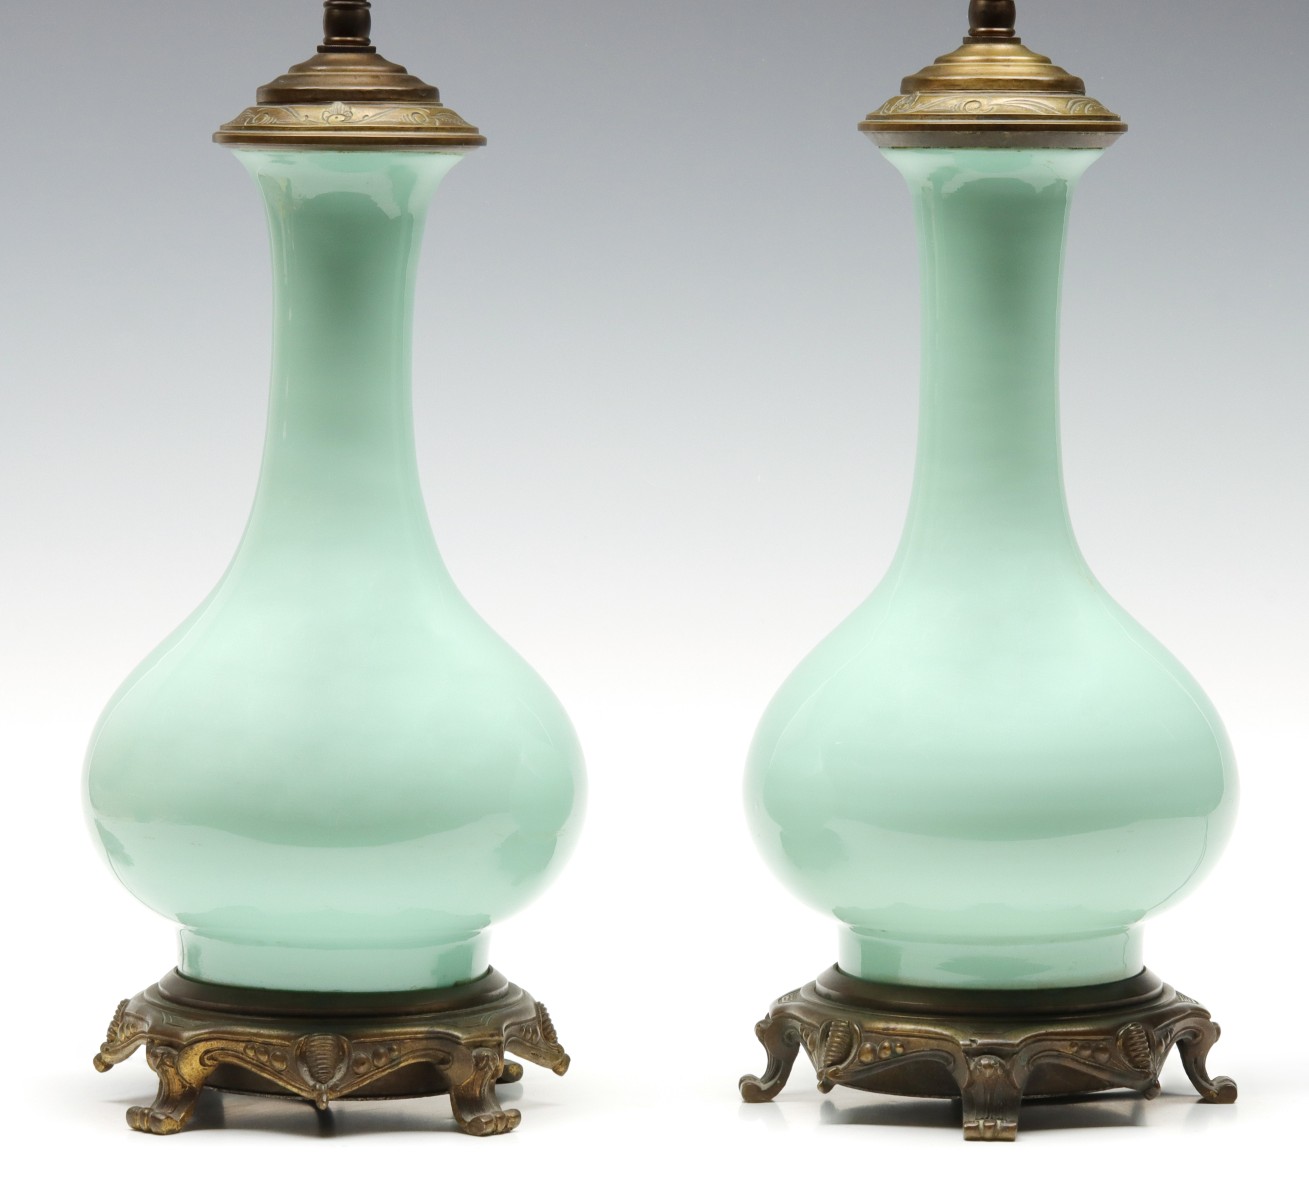 A PAIR EARLY 20TH CENTURY CELADON GLAZE TABLE LAMPS